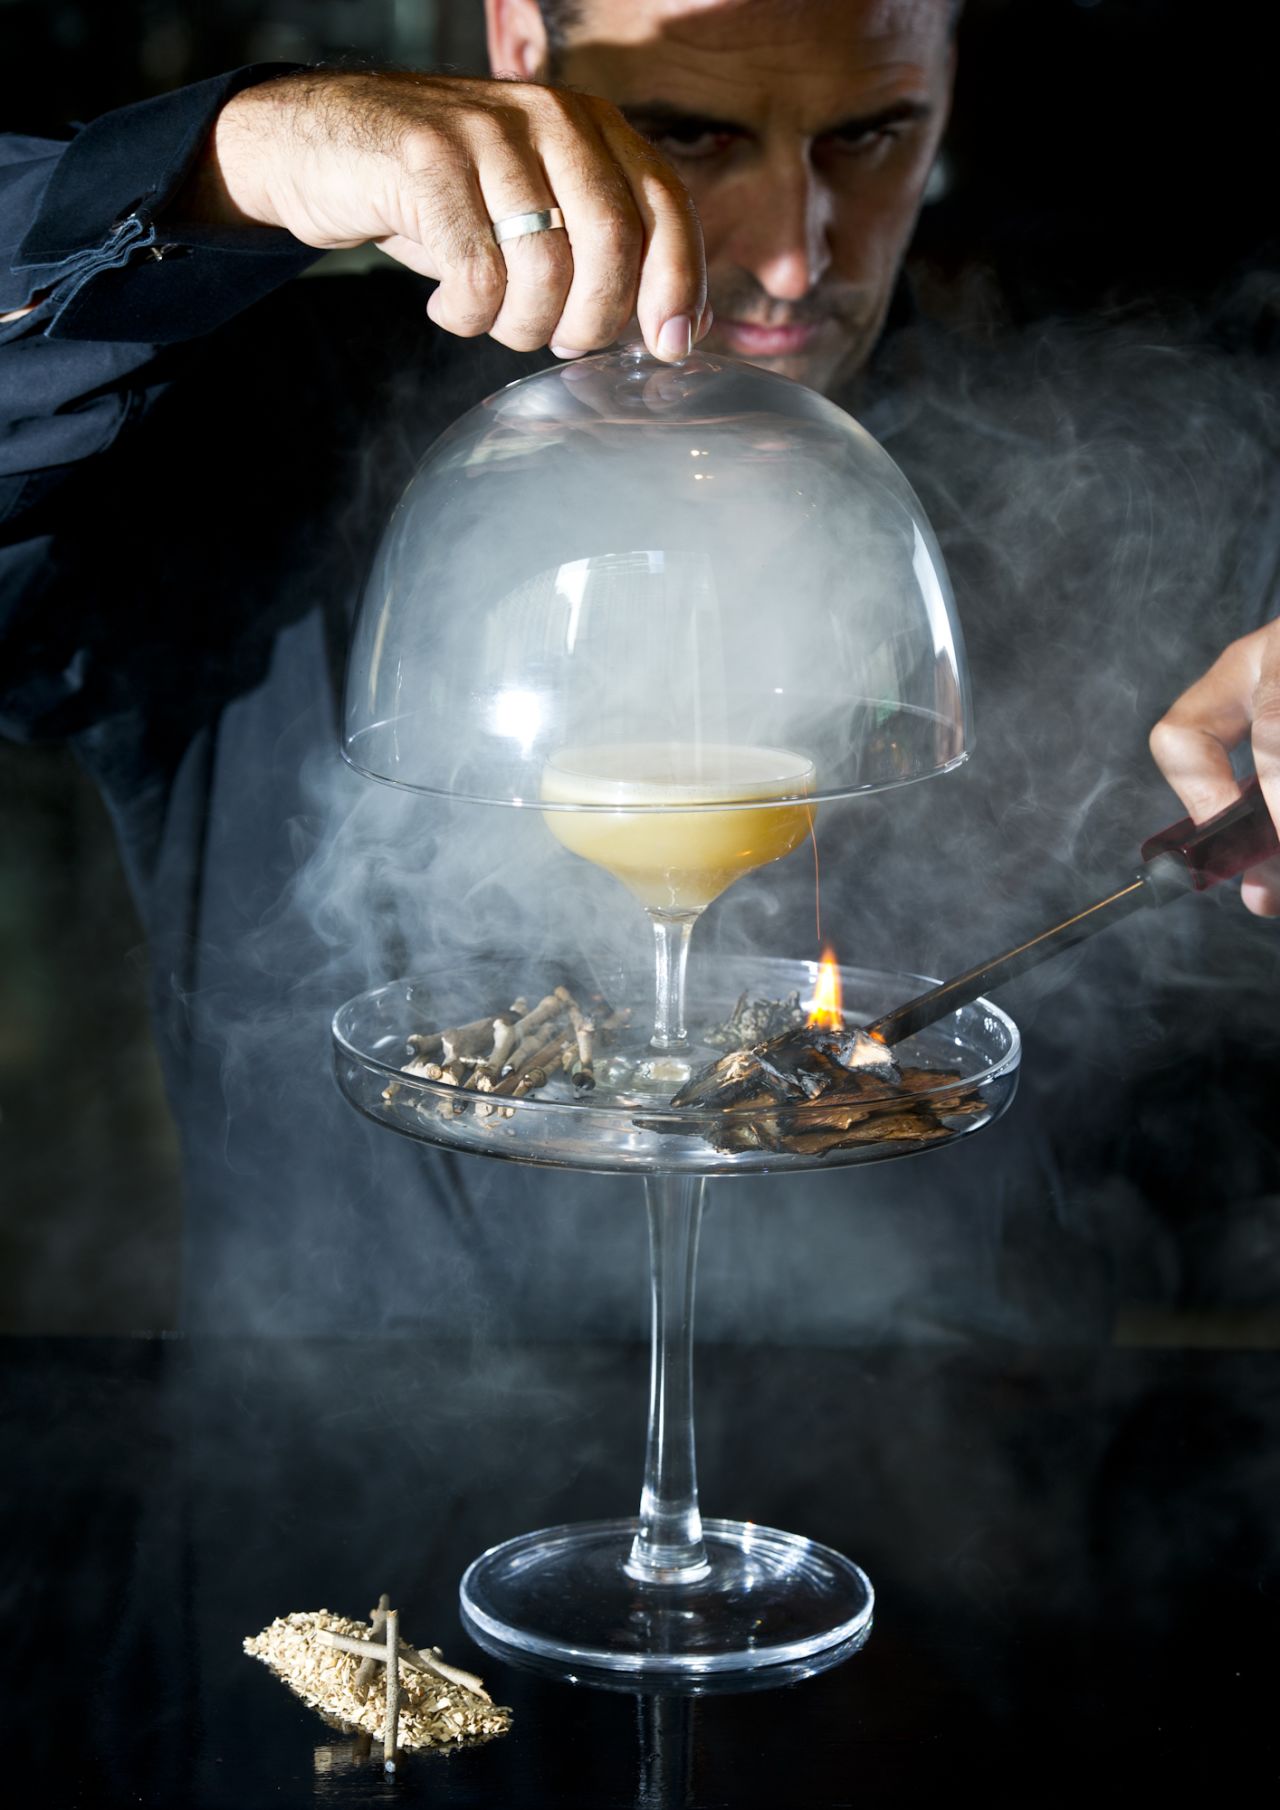 Gin is infused with "gunpowder flavors" and shaken with fernet branca (a traditional herbal digestive) and egg white.